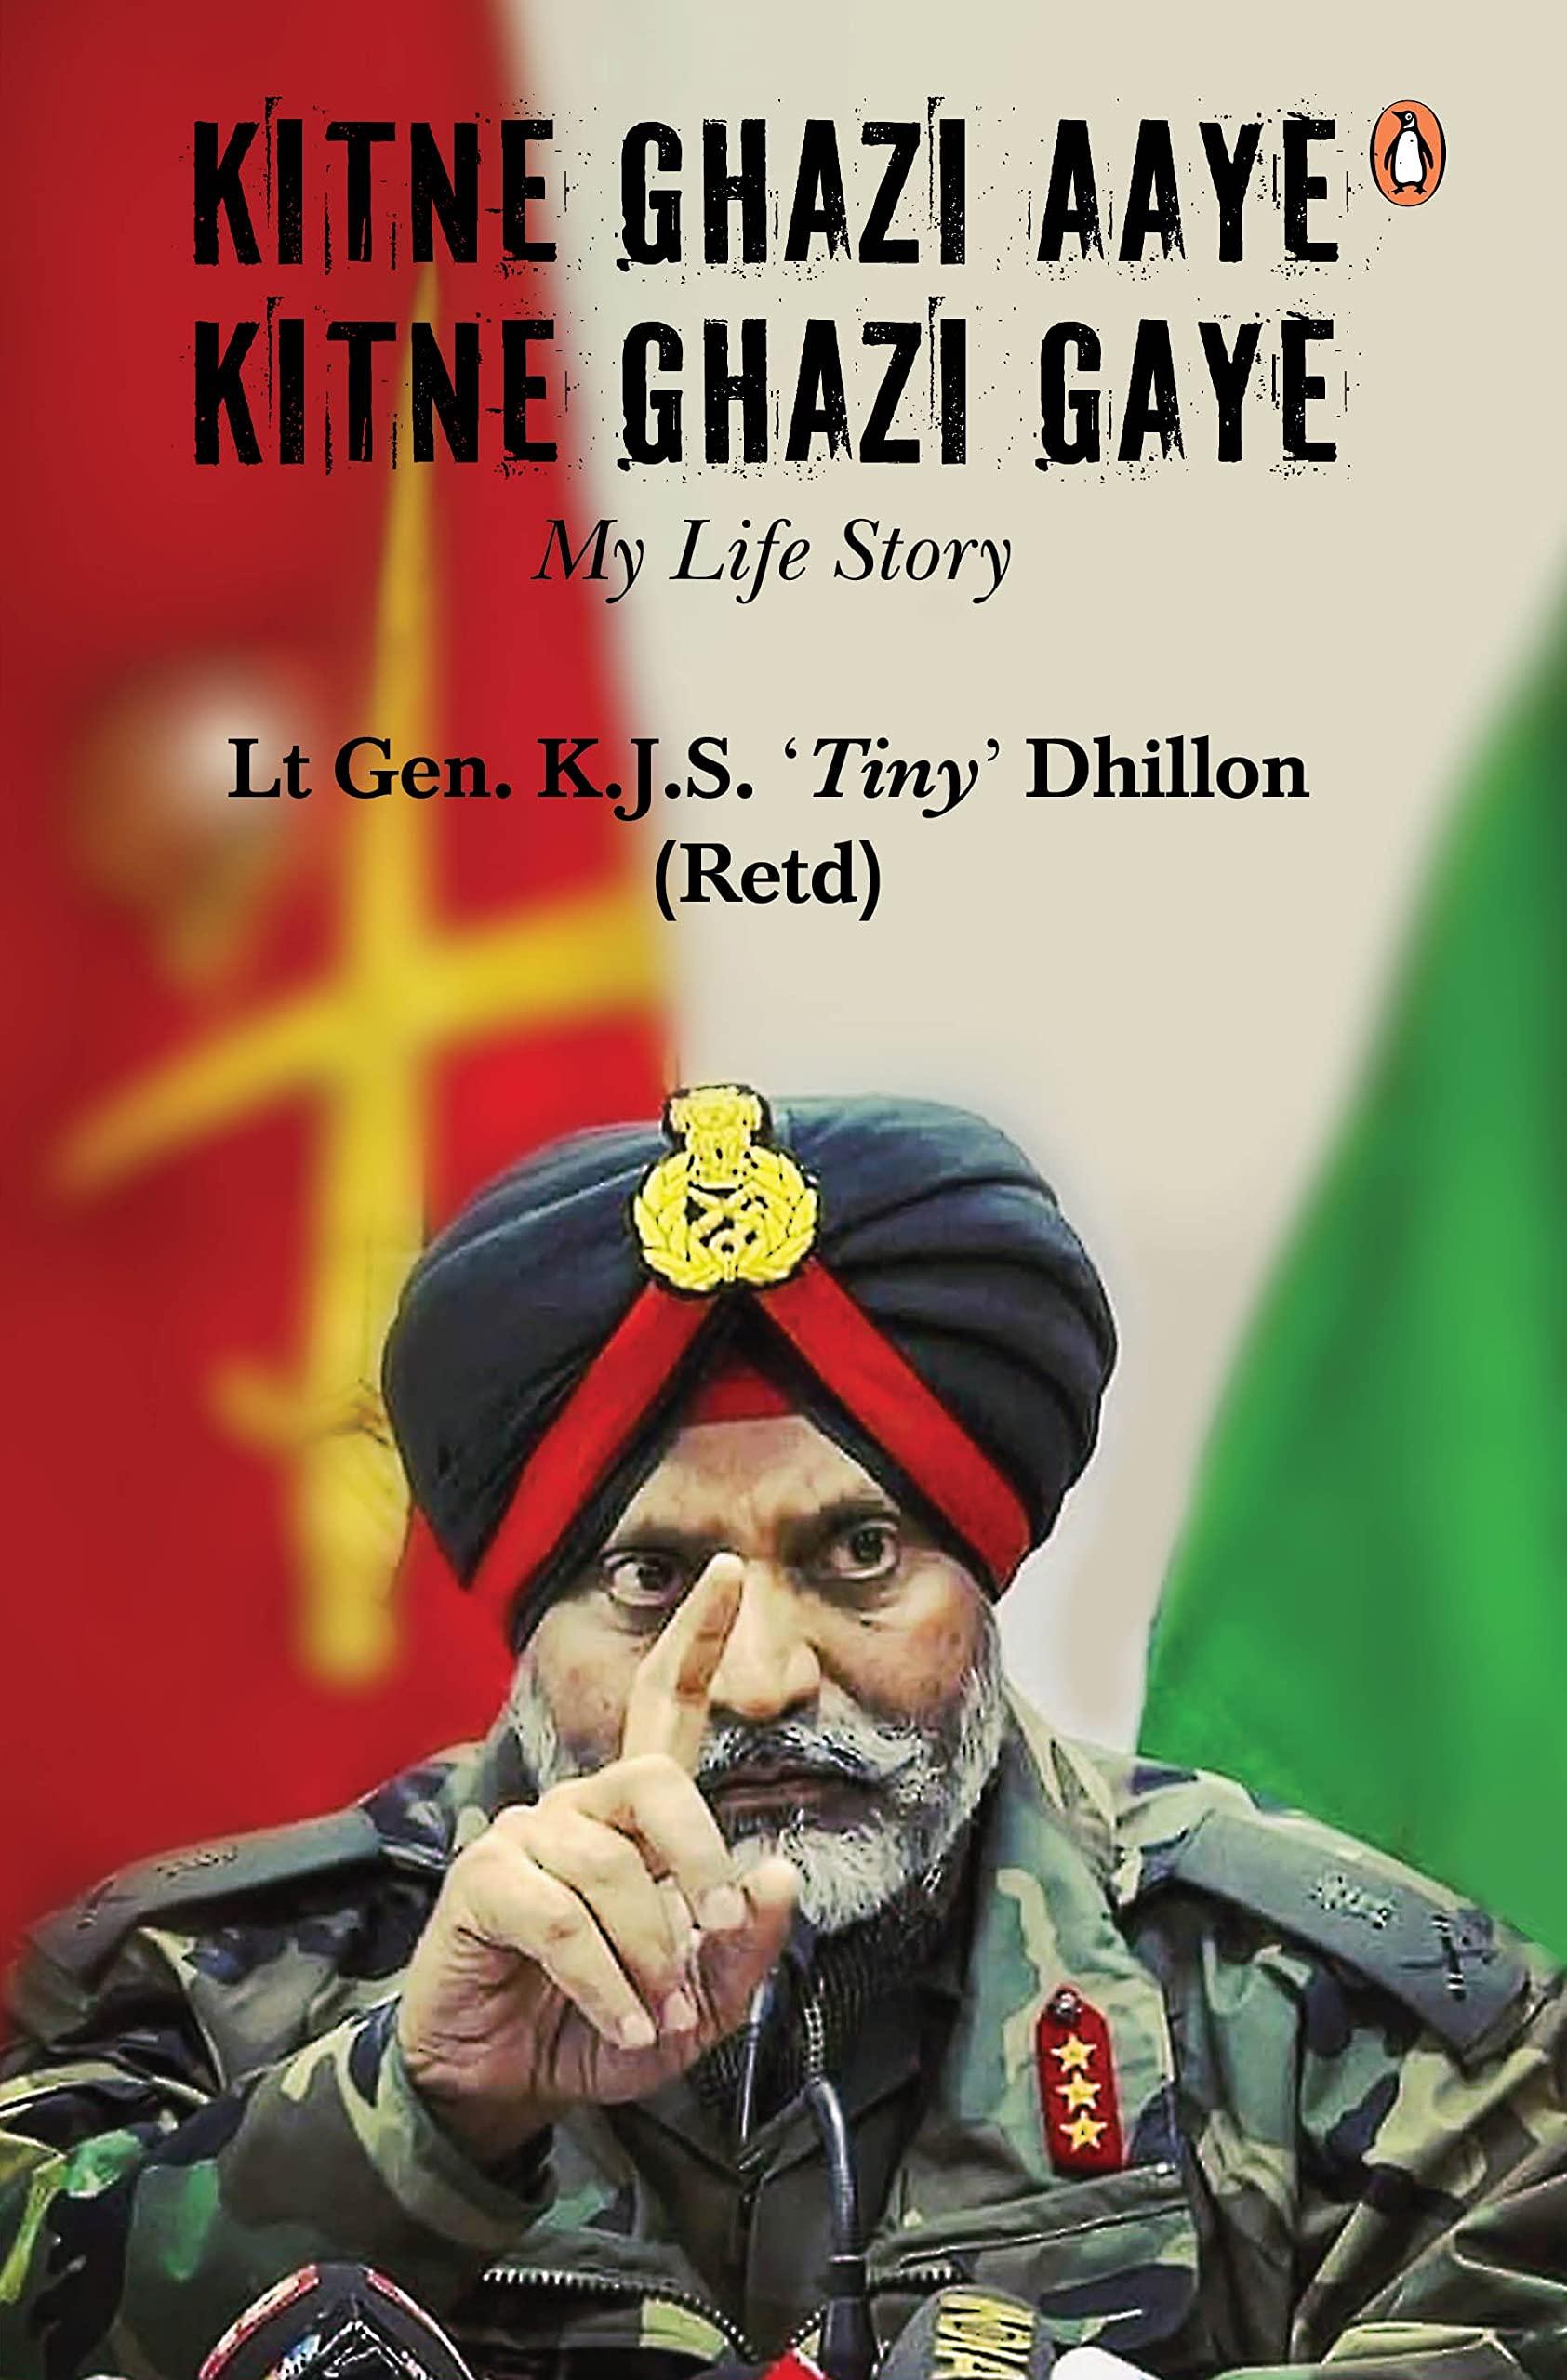 Kitne Ghazi Aaye, Kitne Ghazi Gaye (Signed by the author): A True Life Account of Bravery And Sacrifice of An Army Soldier Who Served India For More Than 40 Years.